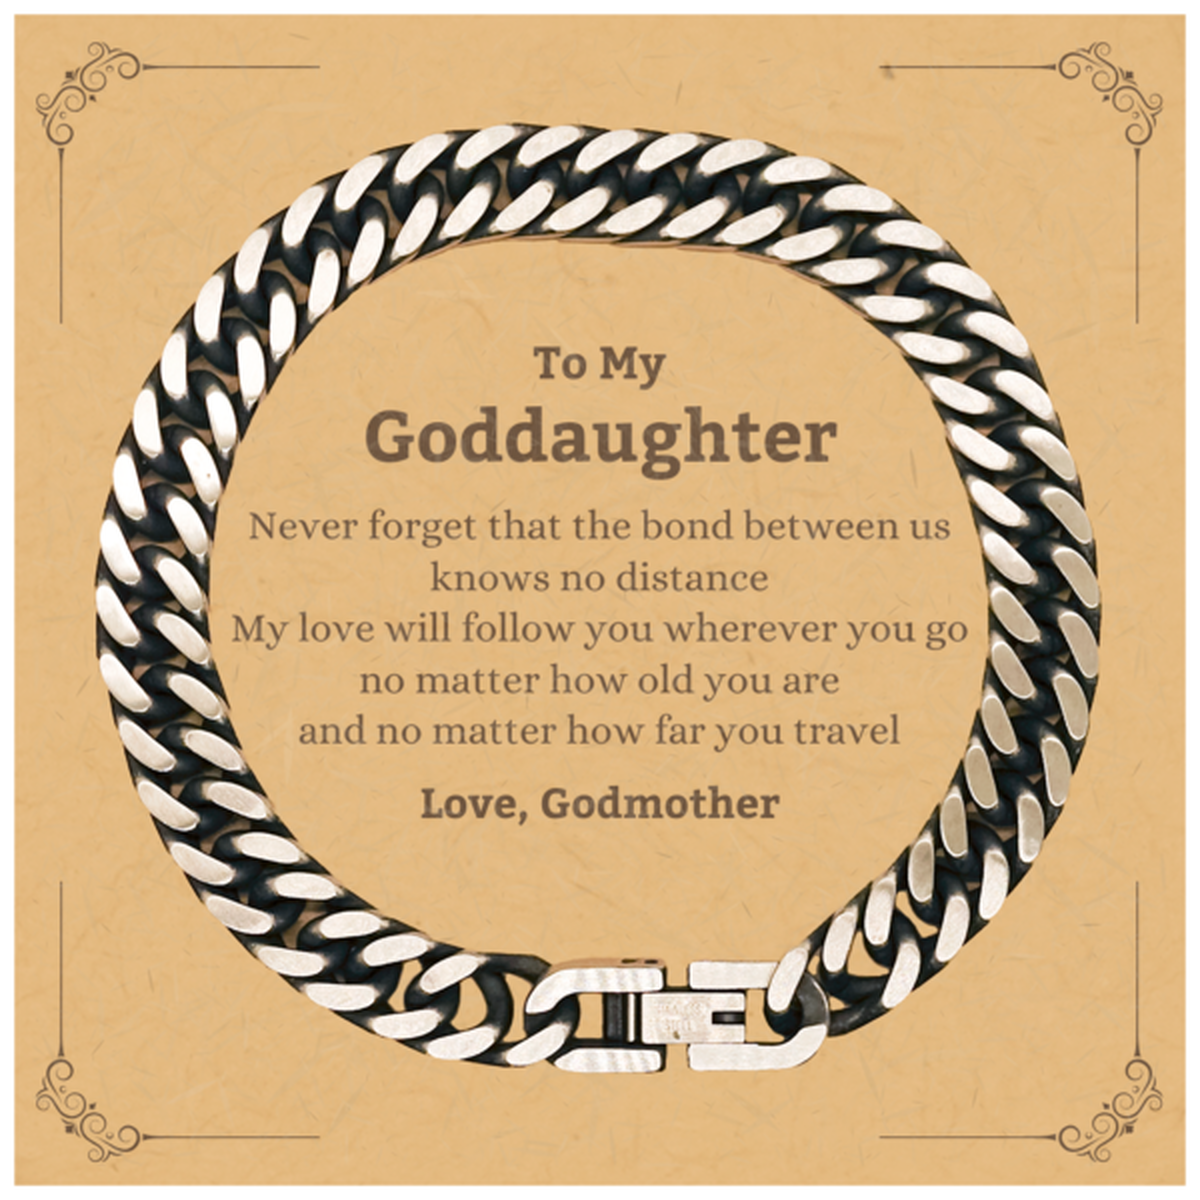 Goddaughter Birthday Gifts from Godmother, Adjustable Cuban Link Chain Bracelet for Goddaughter Christmas Graduation Unique Gifts Goddaughter Never forget that the bond between us knows no distance. Love, Godmother